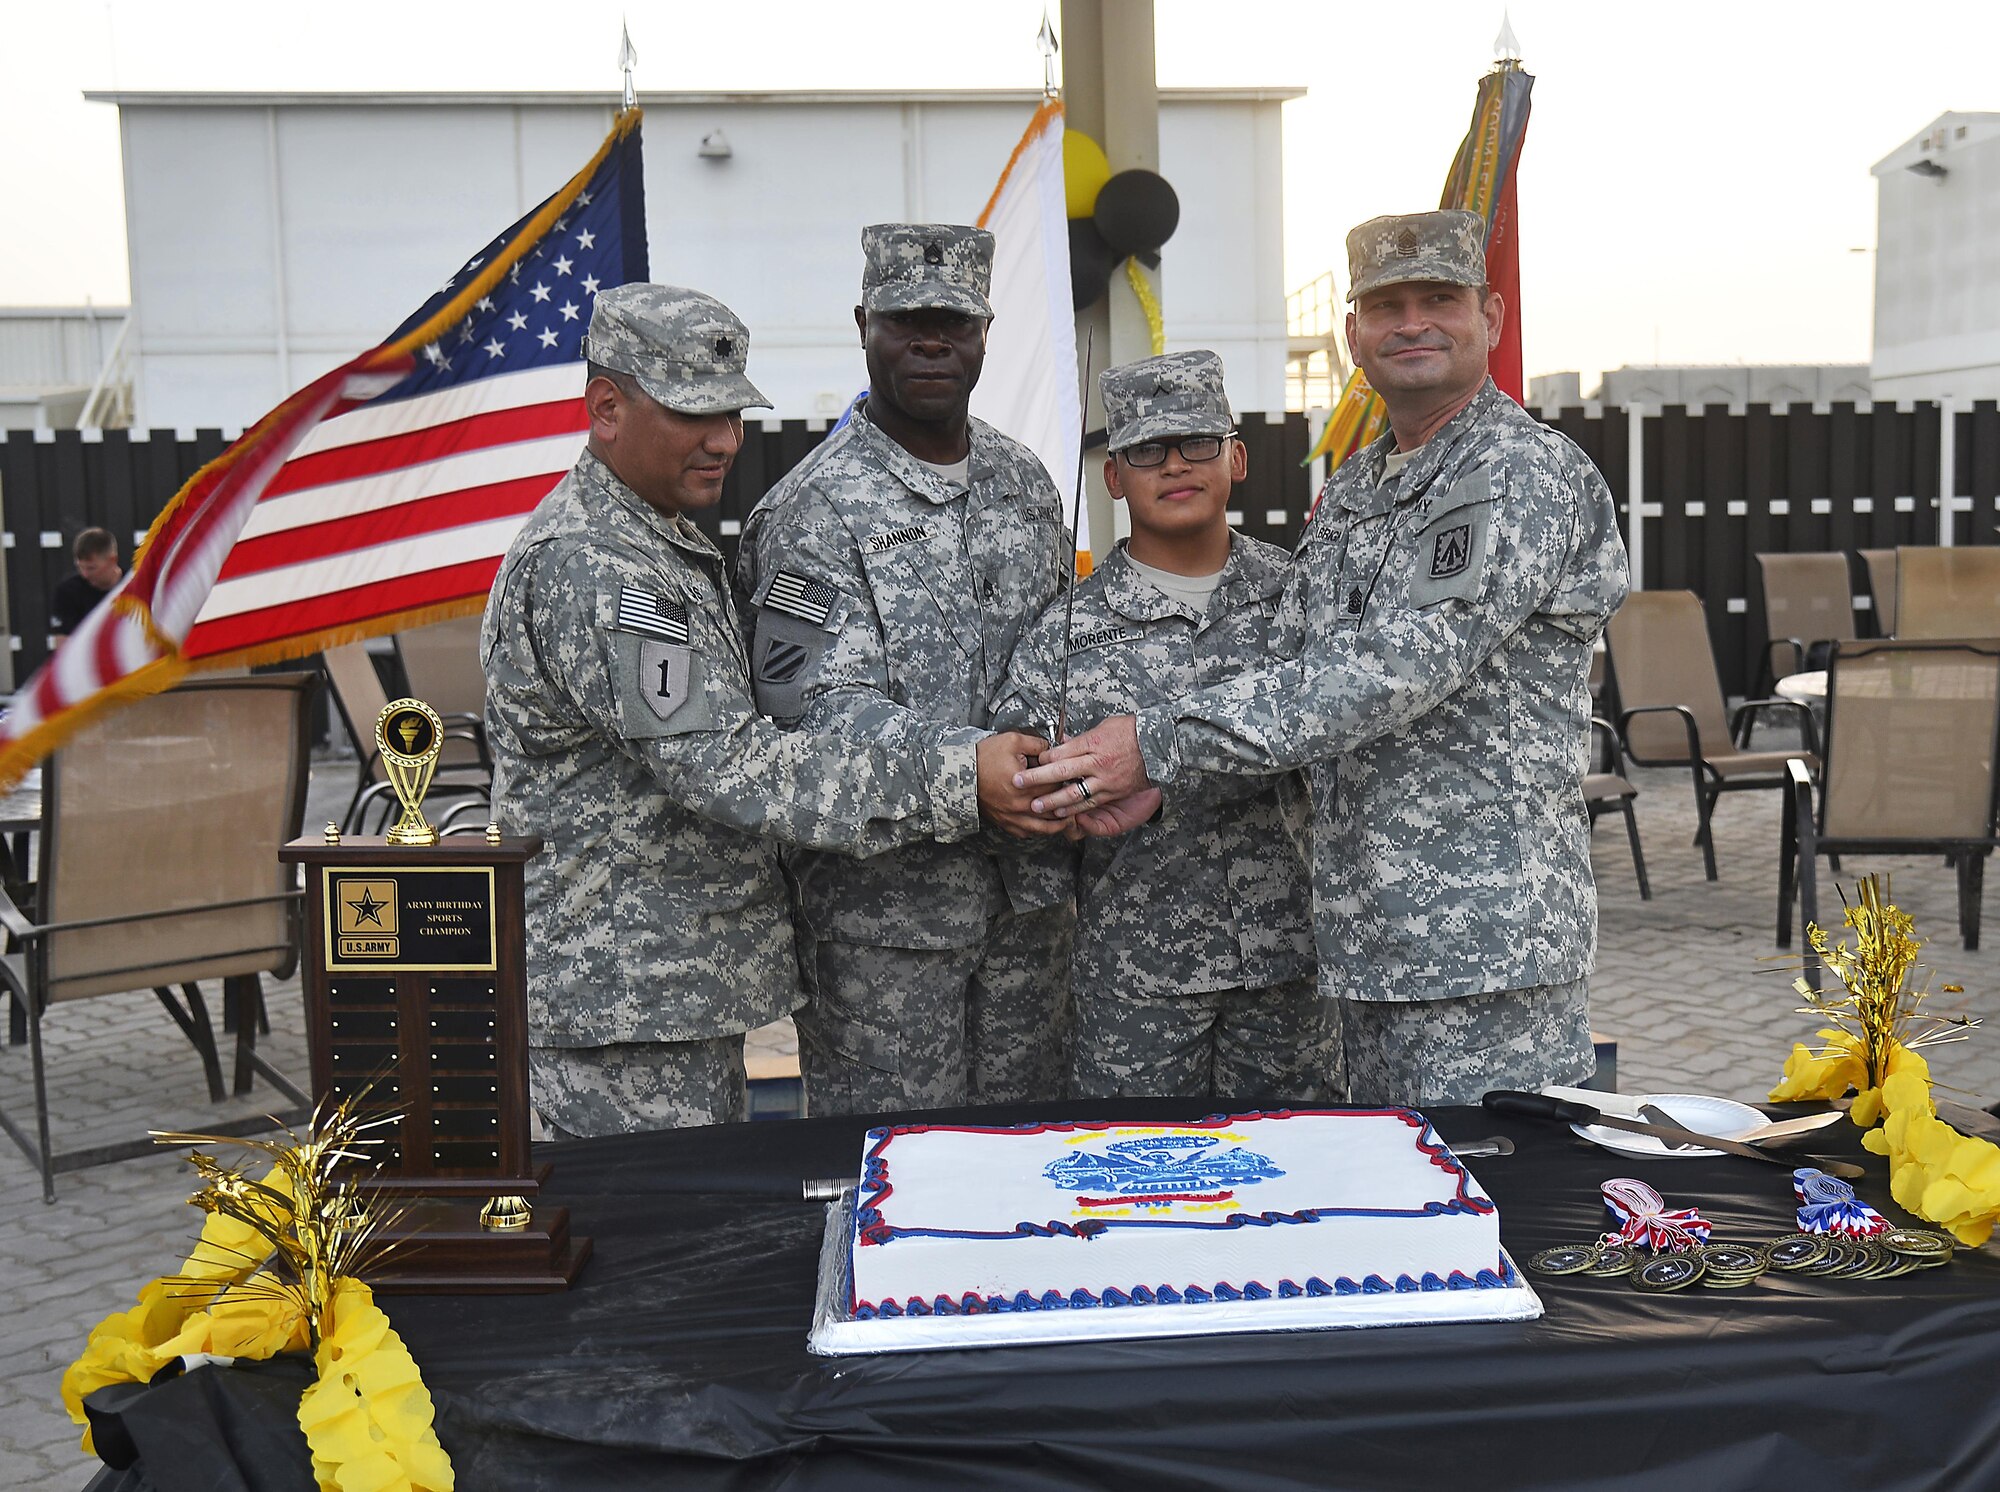 From left to right Lt. Col. Mike Solis, Staff Sgt. George, Private Ronnie, and Command Sgt. Maj. Paul Albright cut the 240th U.S. Army birthday cake at an undisclosed location in Southwest Asia June 13, 2015. The 1st Battalion, 7th Air Defense Artillery Regiment hosted a two-day sporting event culminated by a closing ceremony to celebrate their 240th birthday. (U.S. Air Force photo/Tech. Sgt. Jeff Andrejcik)